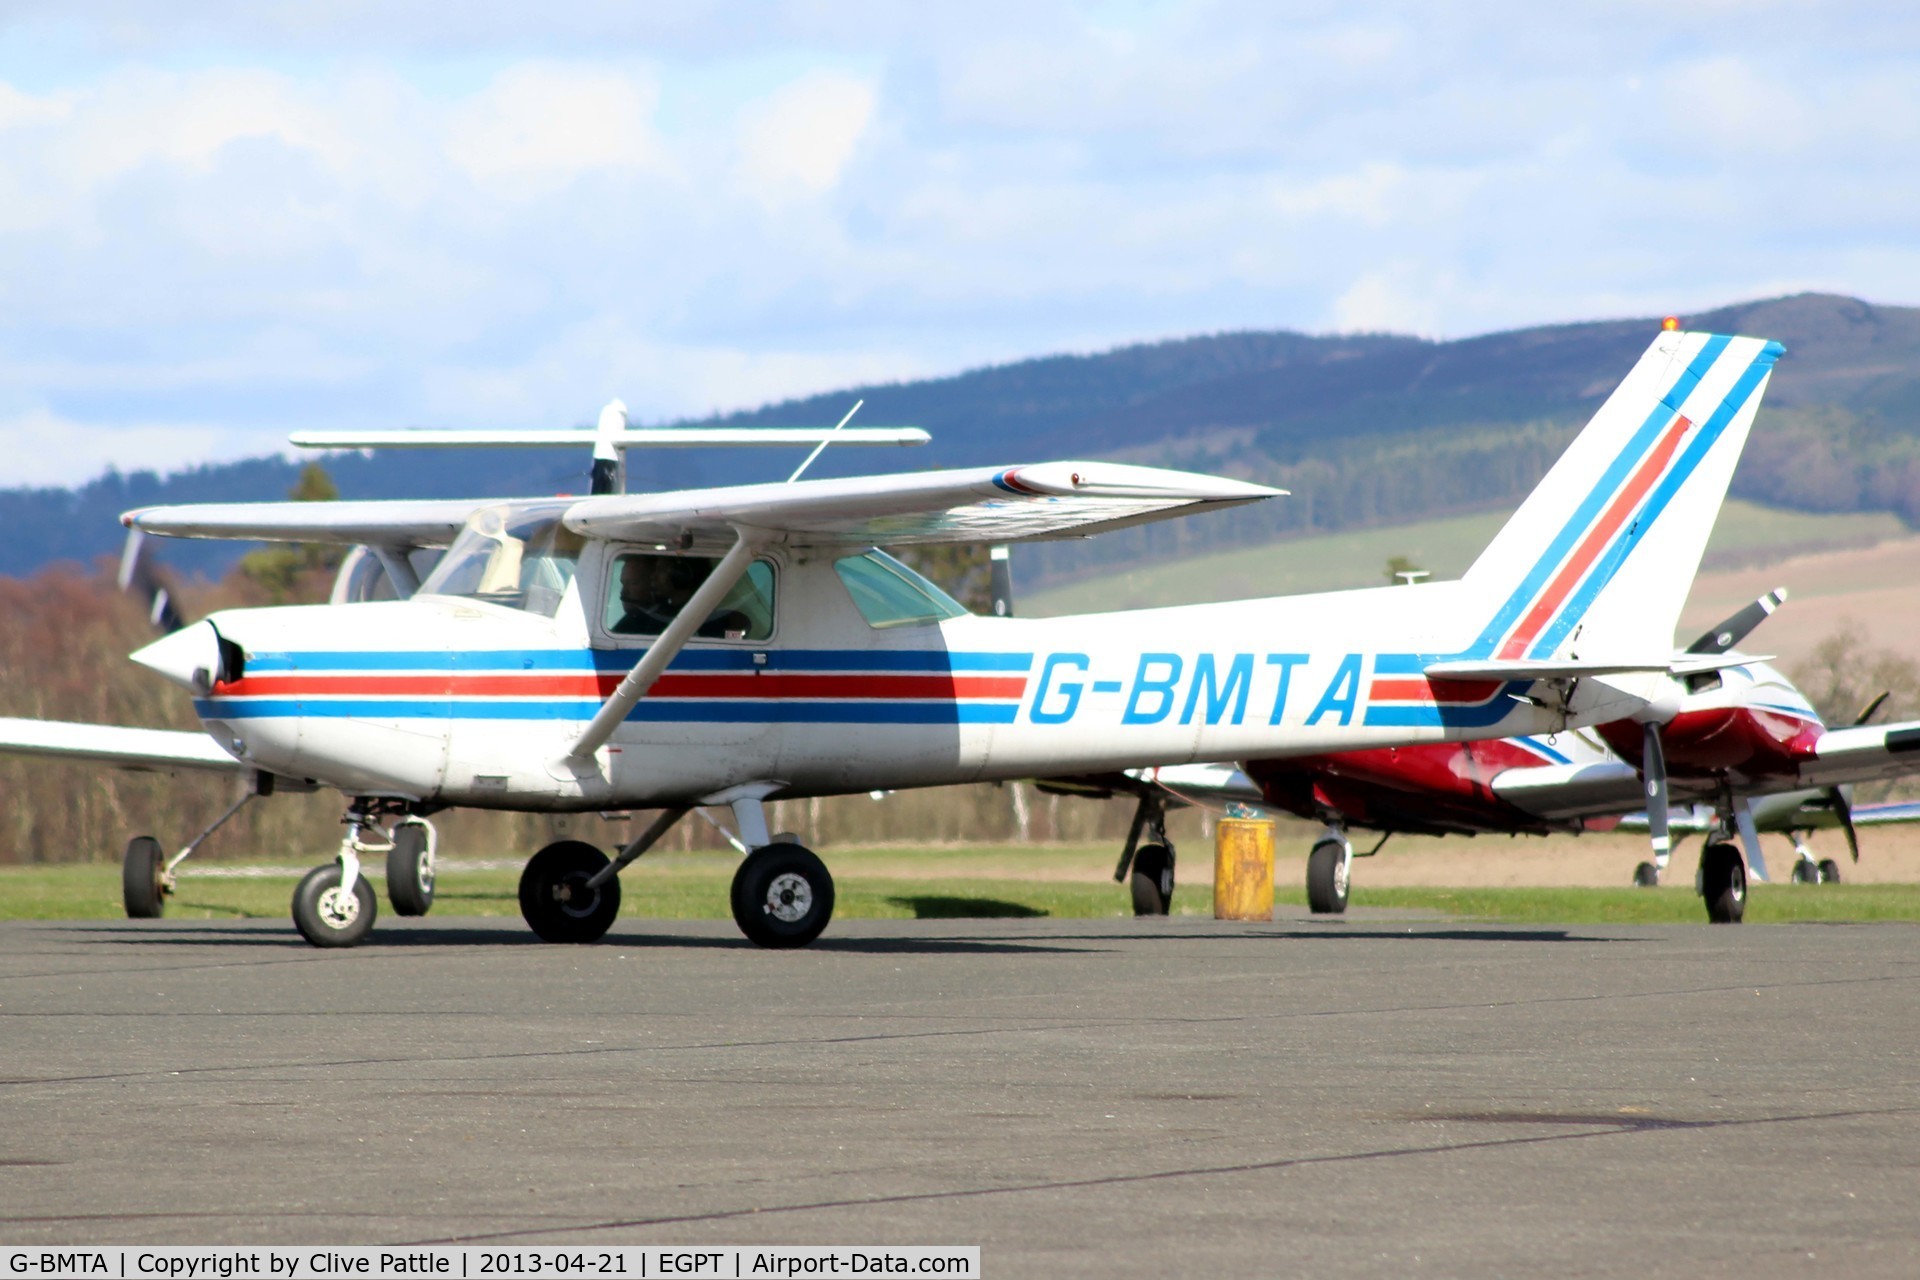 G-BMTA, 1979 Cessna 152 C/N 152-82864, Ready for action at Perth EGPT